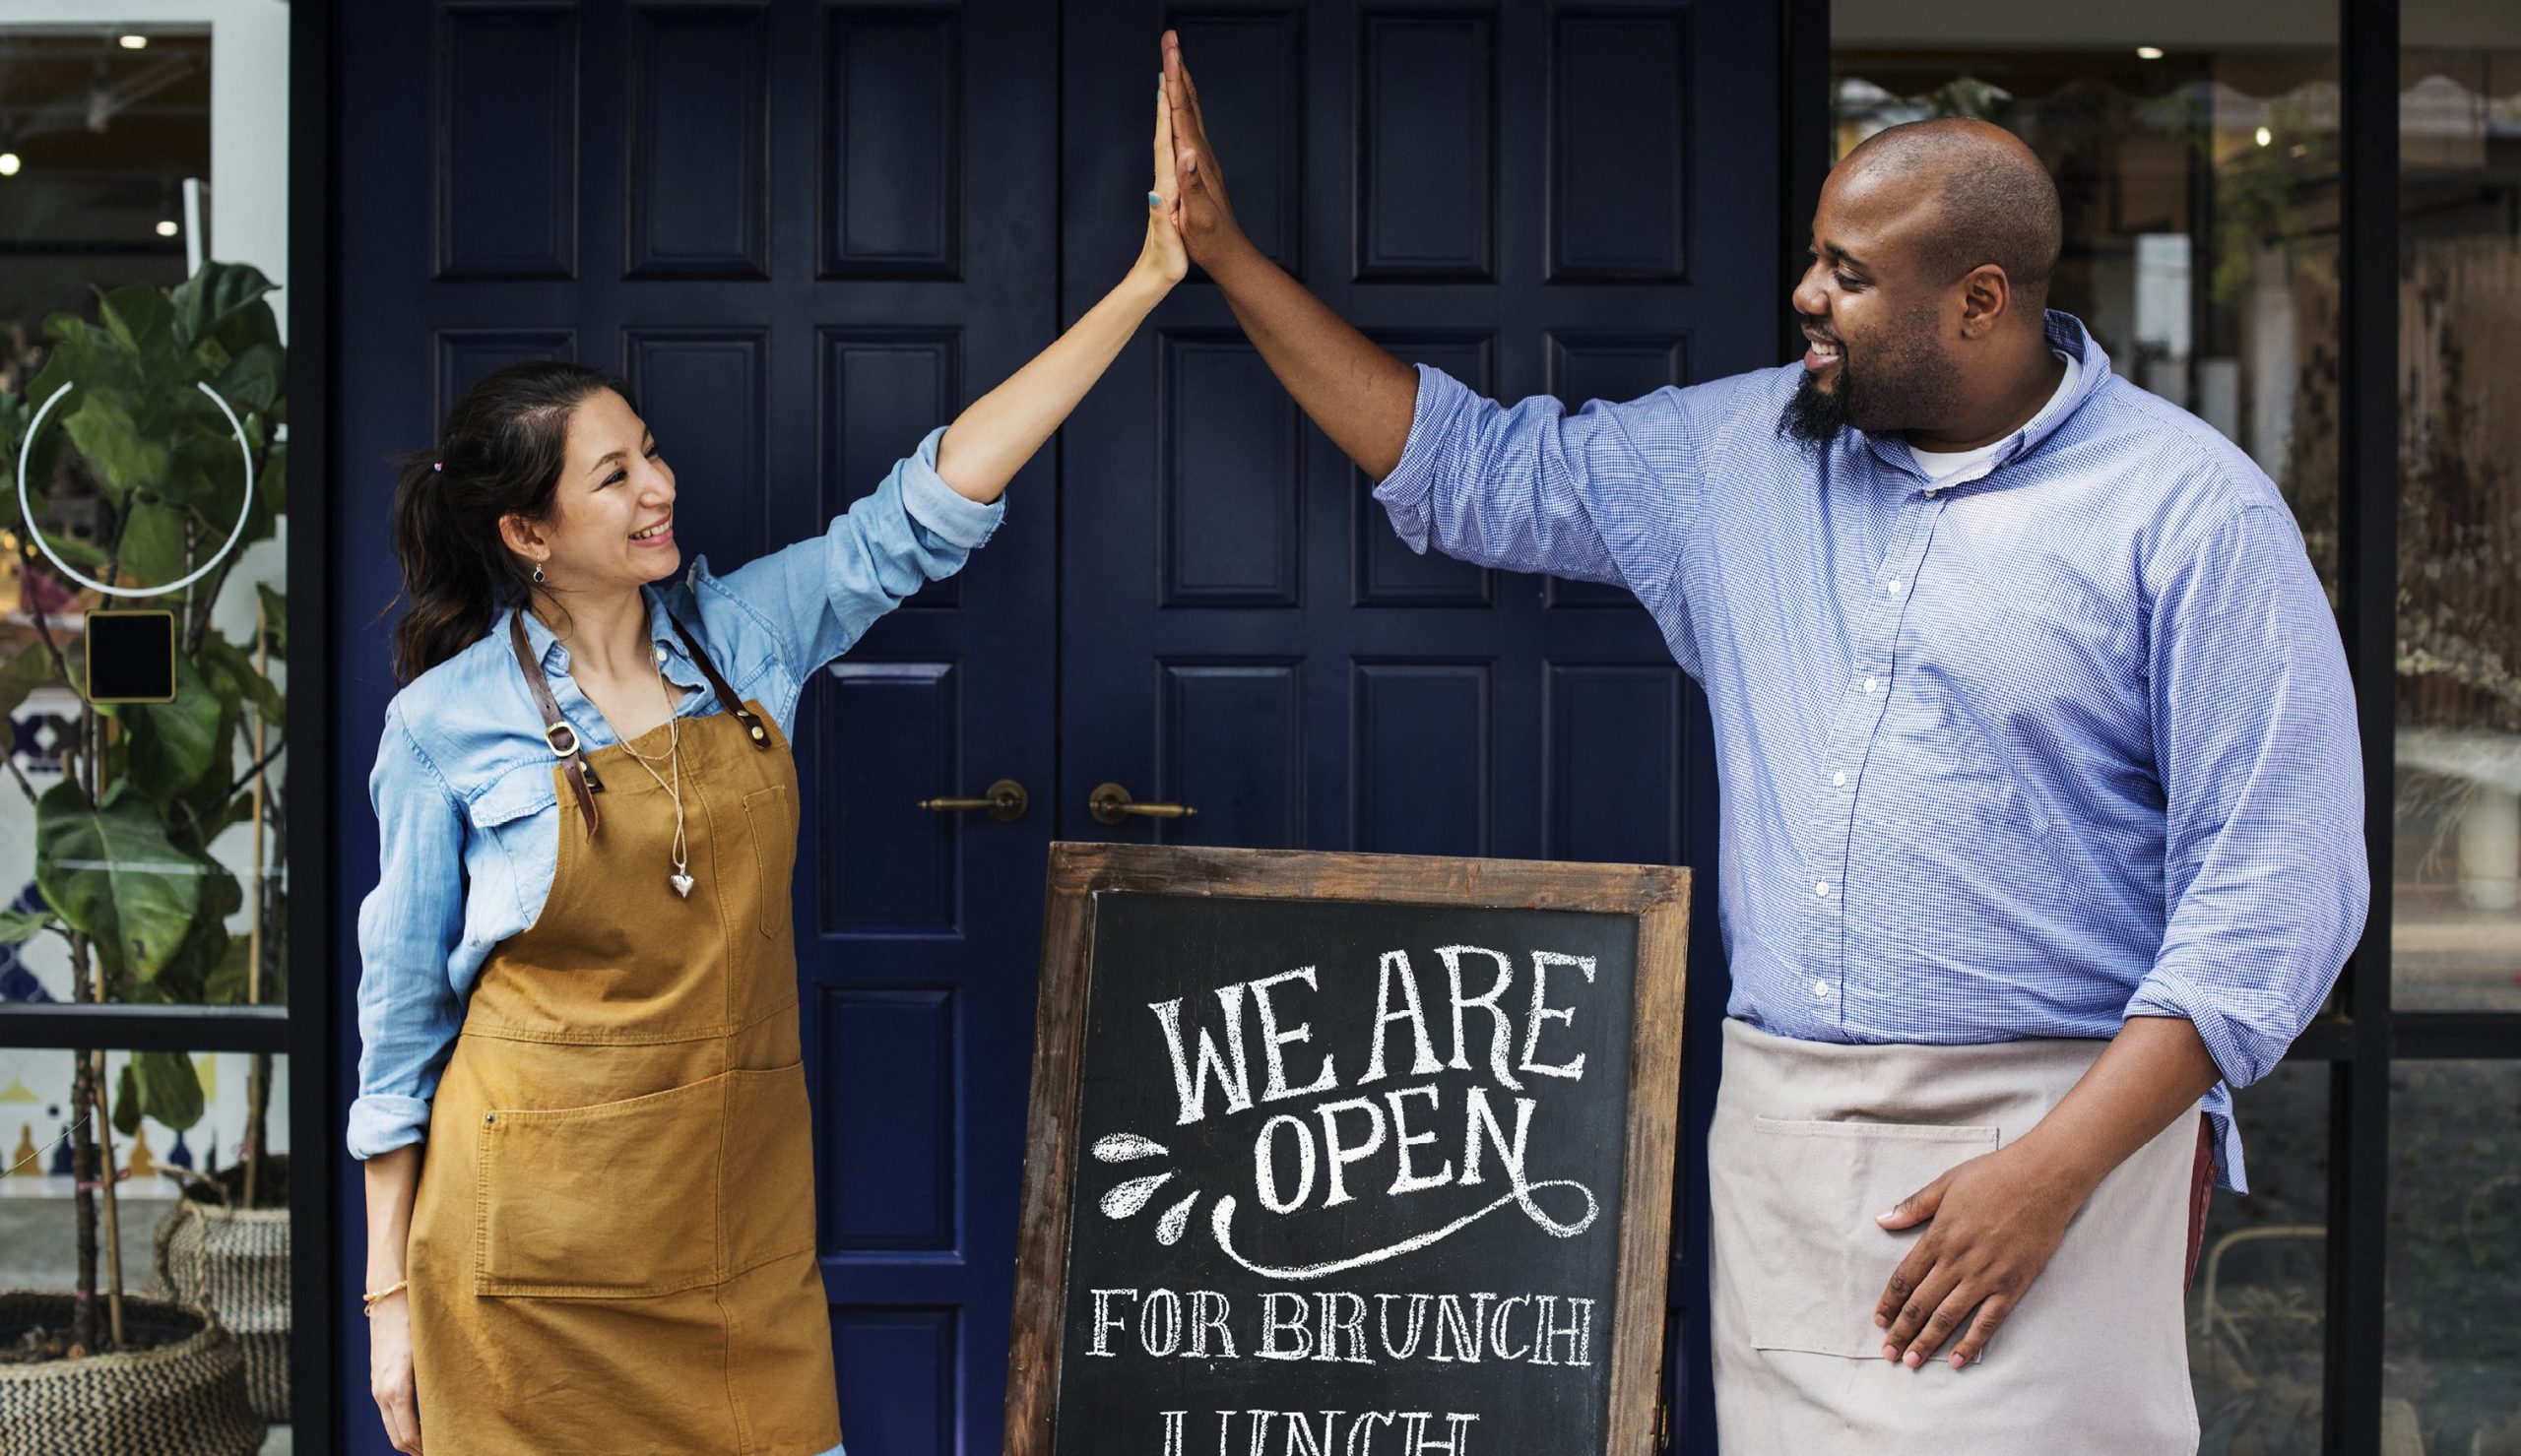 Female and Male business owners holding Open sign